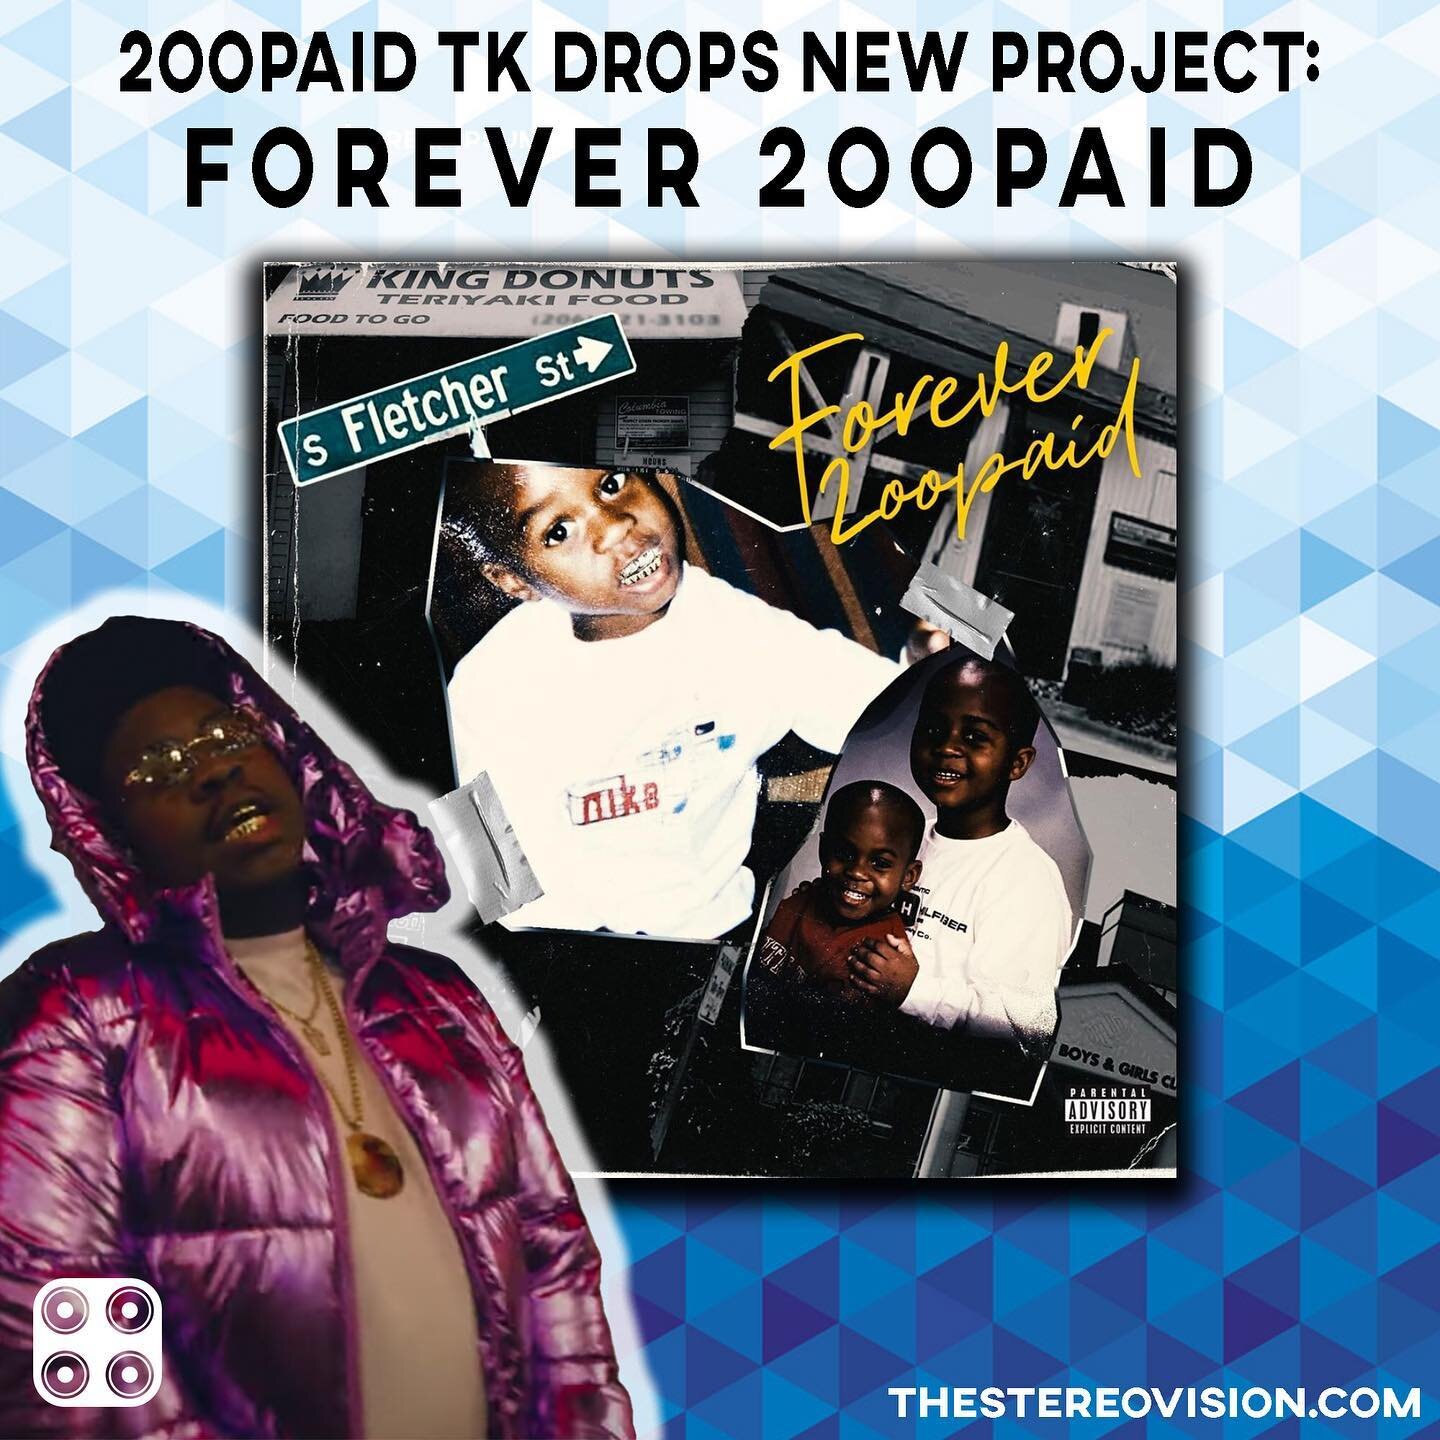 Seattle&rsquo;s champion 2oopaid TK just dropped his new project &lsquo;Forever 2P&rsquo; and it&rsquo;s sounding absolutely 🔥🔥🔥 Swipe to check out two songs that are included on the project 

Is 2oopaid the best upcoming artist in the Northwest?